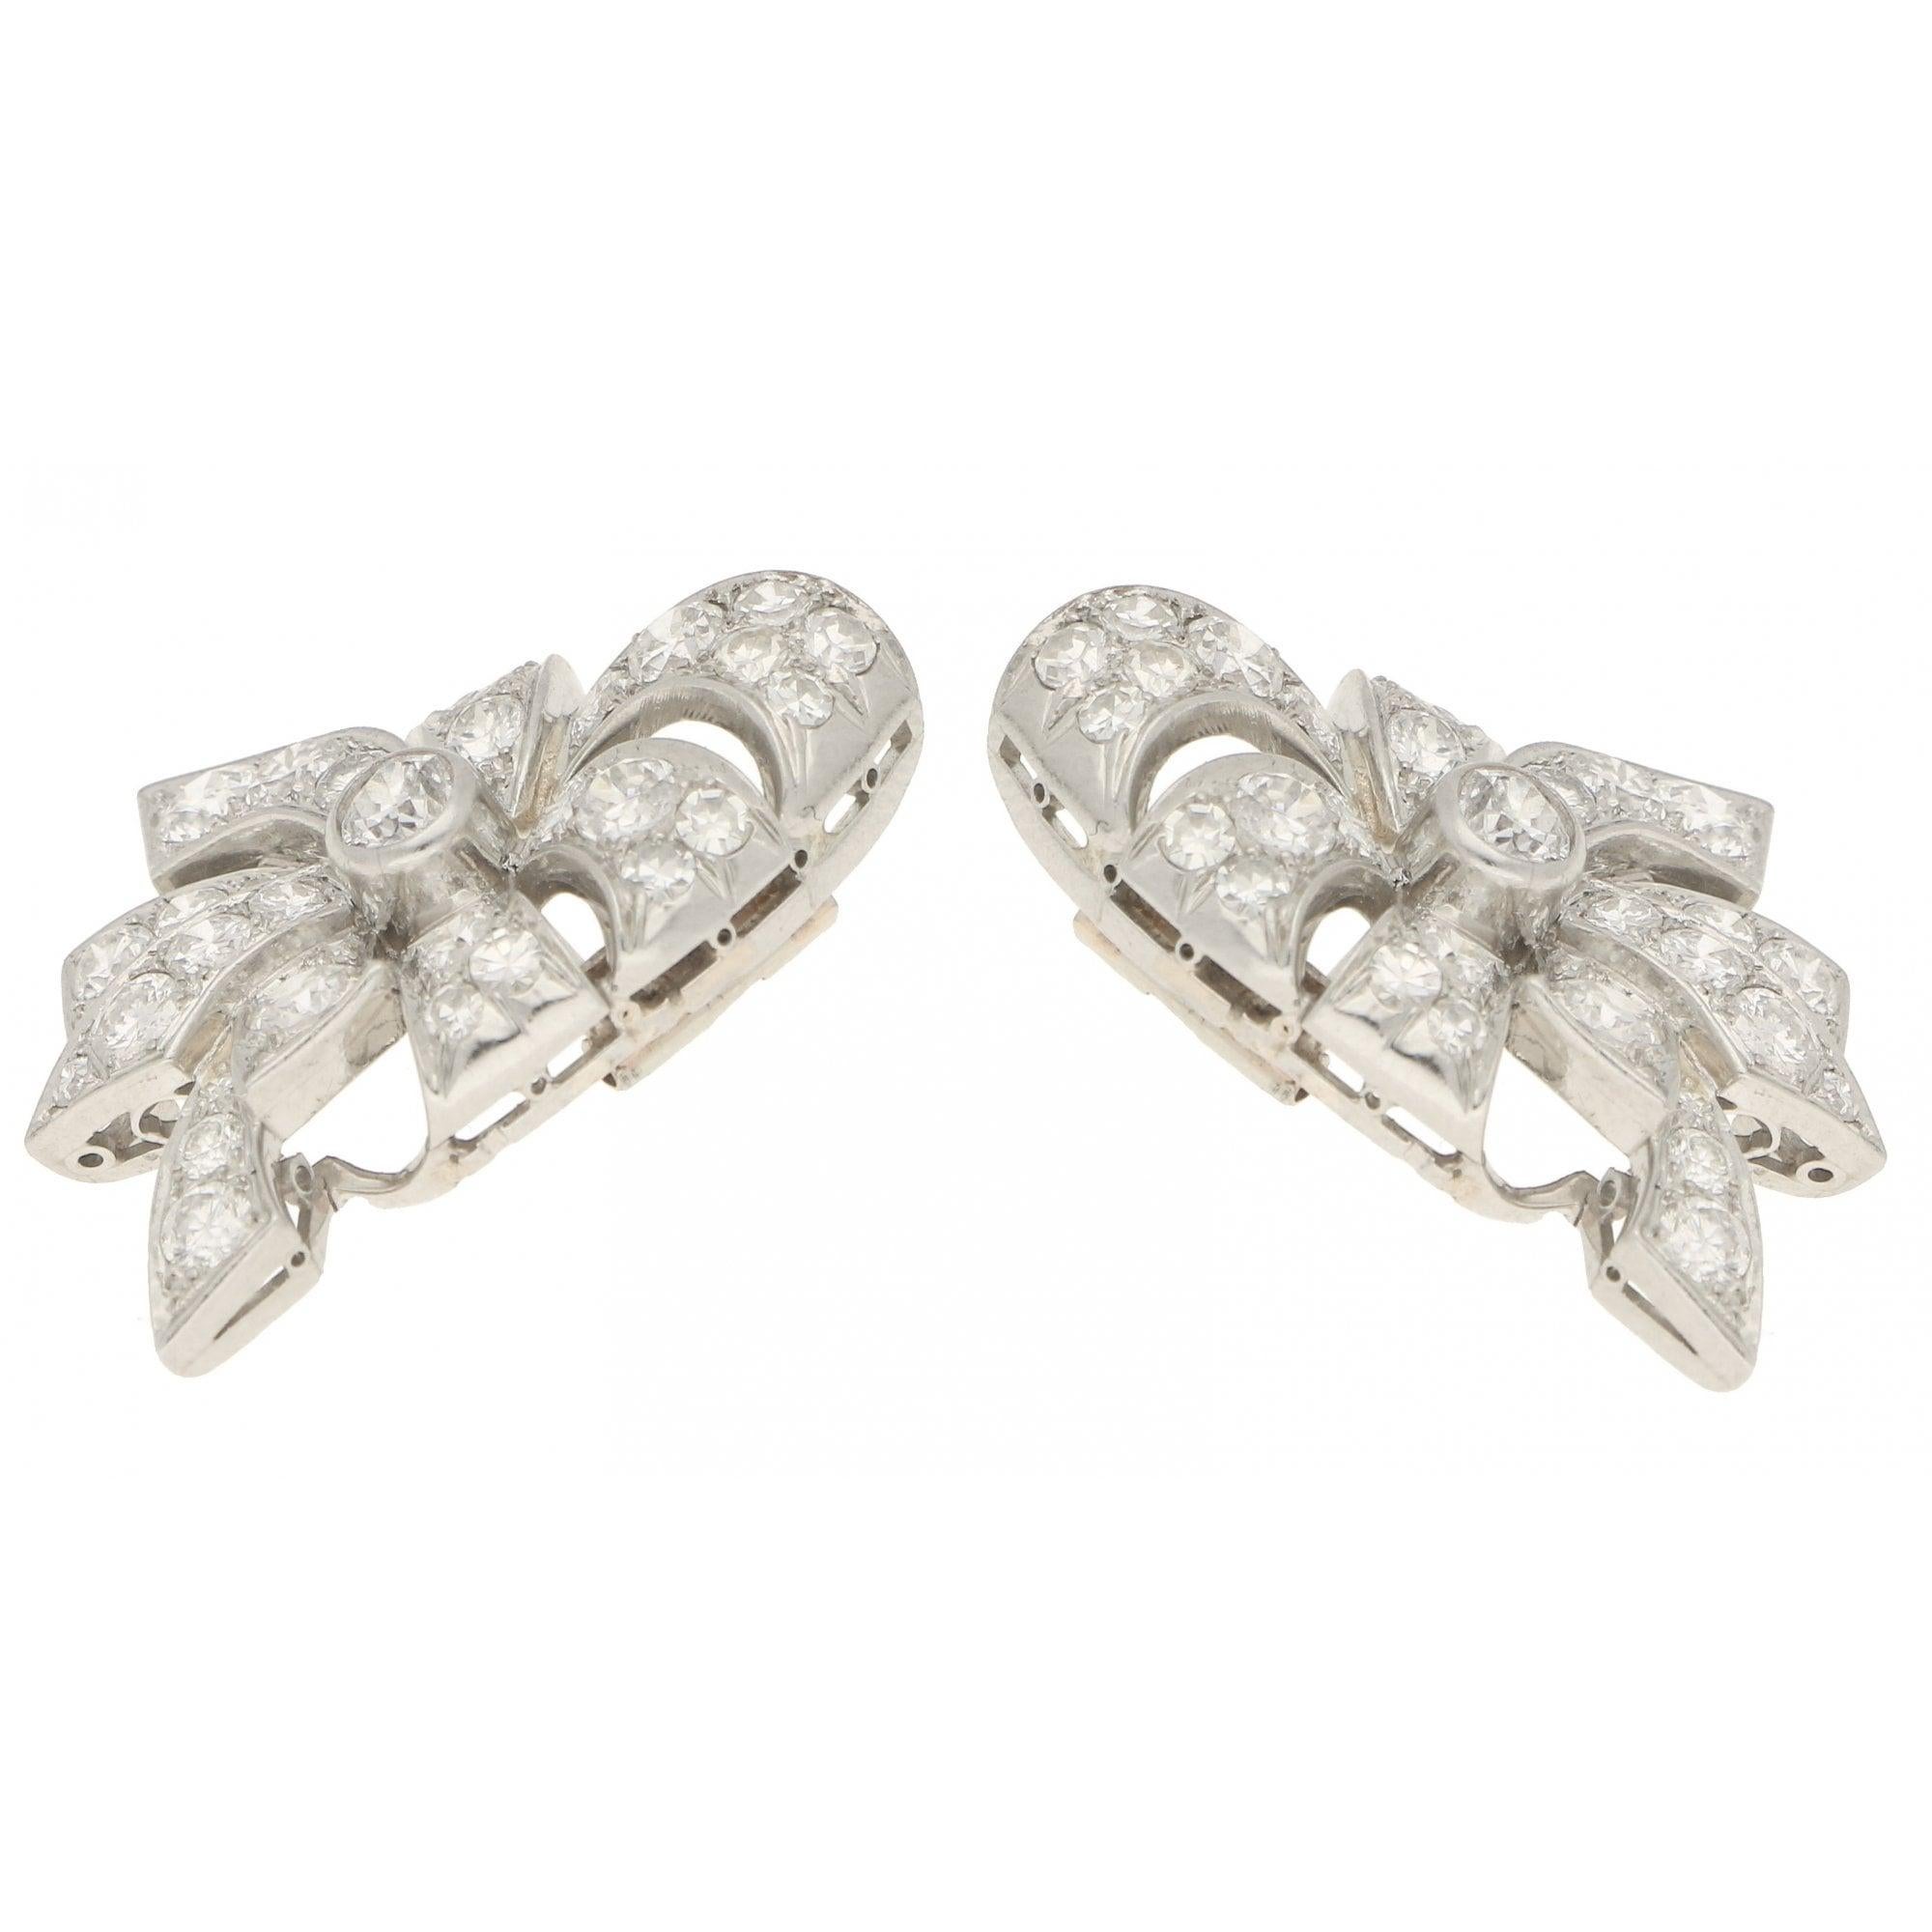 Mid-20th Century Diamond Bow Earrings in White Gold 4.20ct approx 1